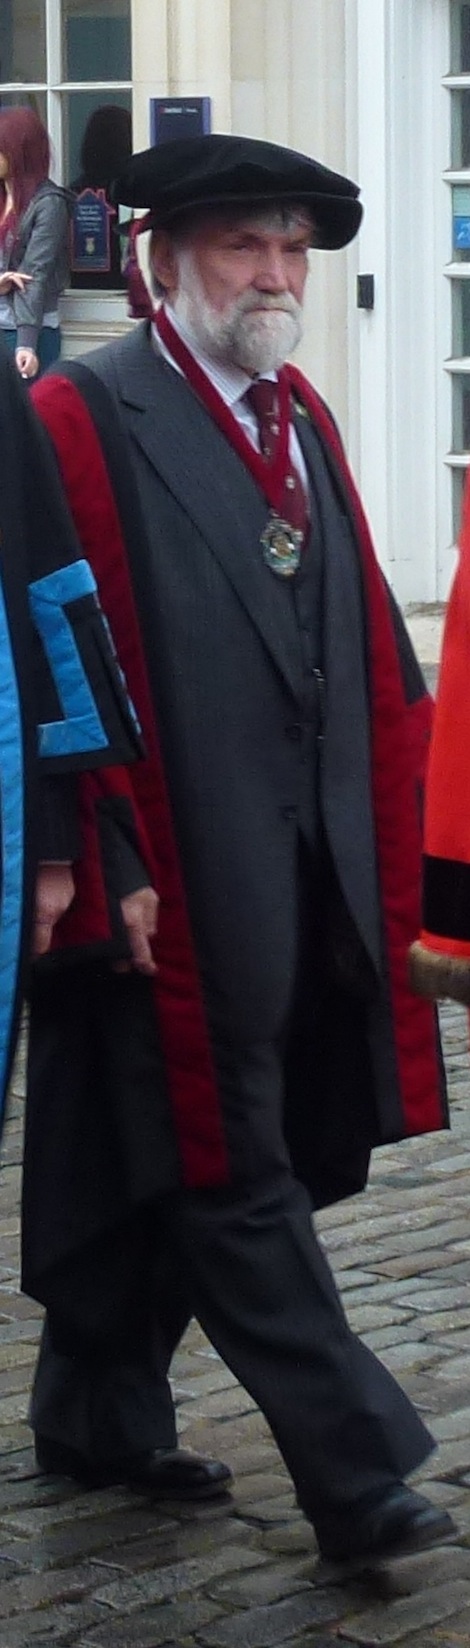 Matthew Alexander in his Remembrancer robes during the Judiciary Procession October 2013.